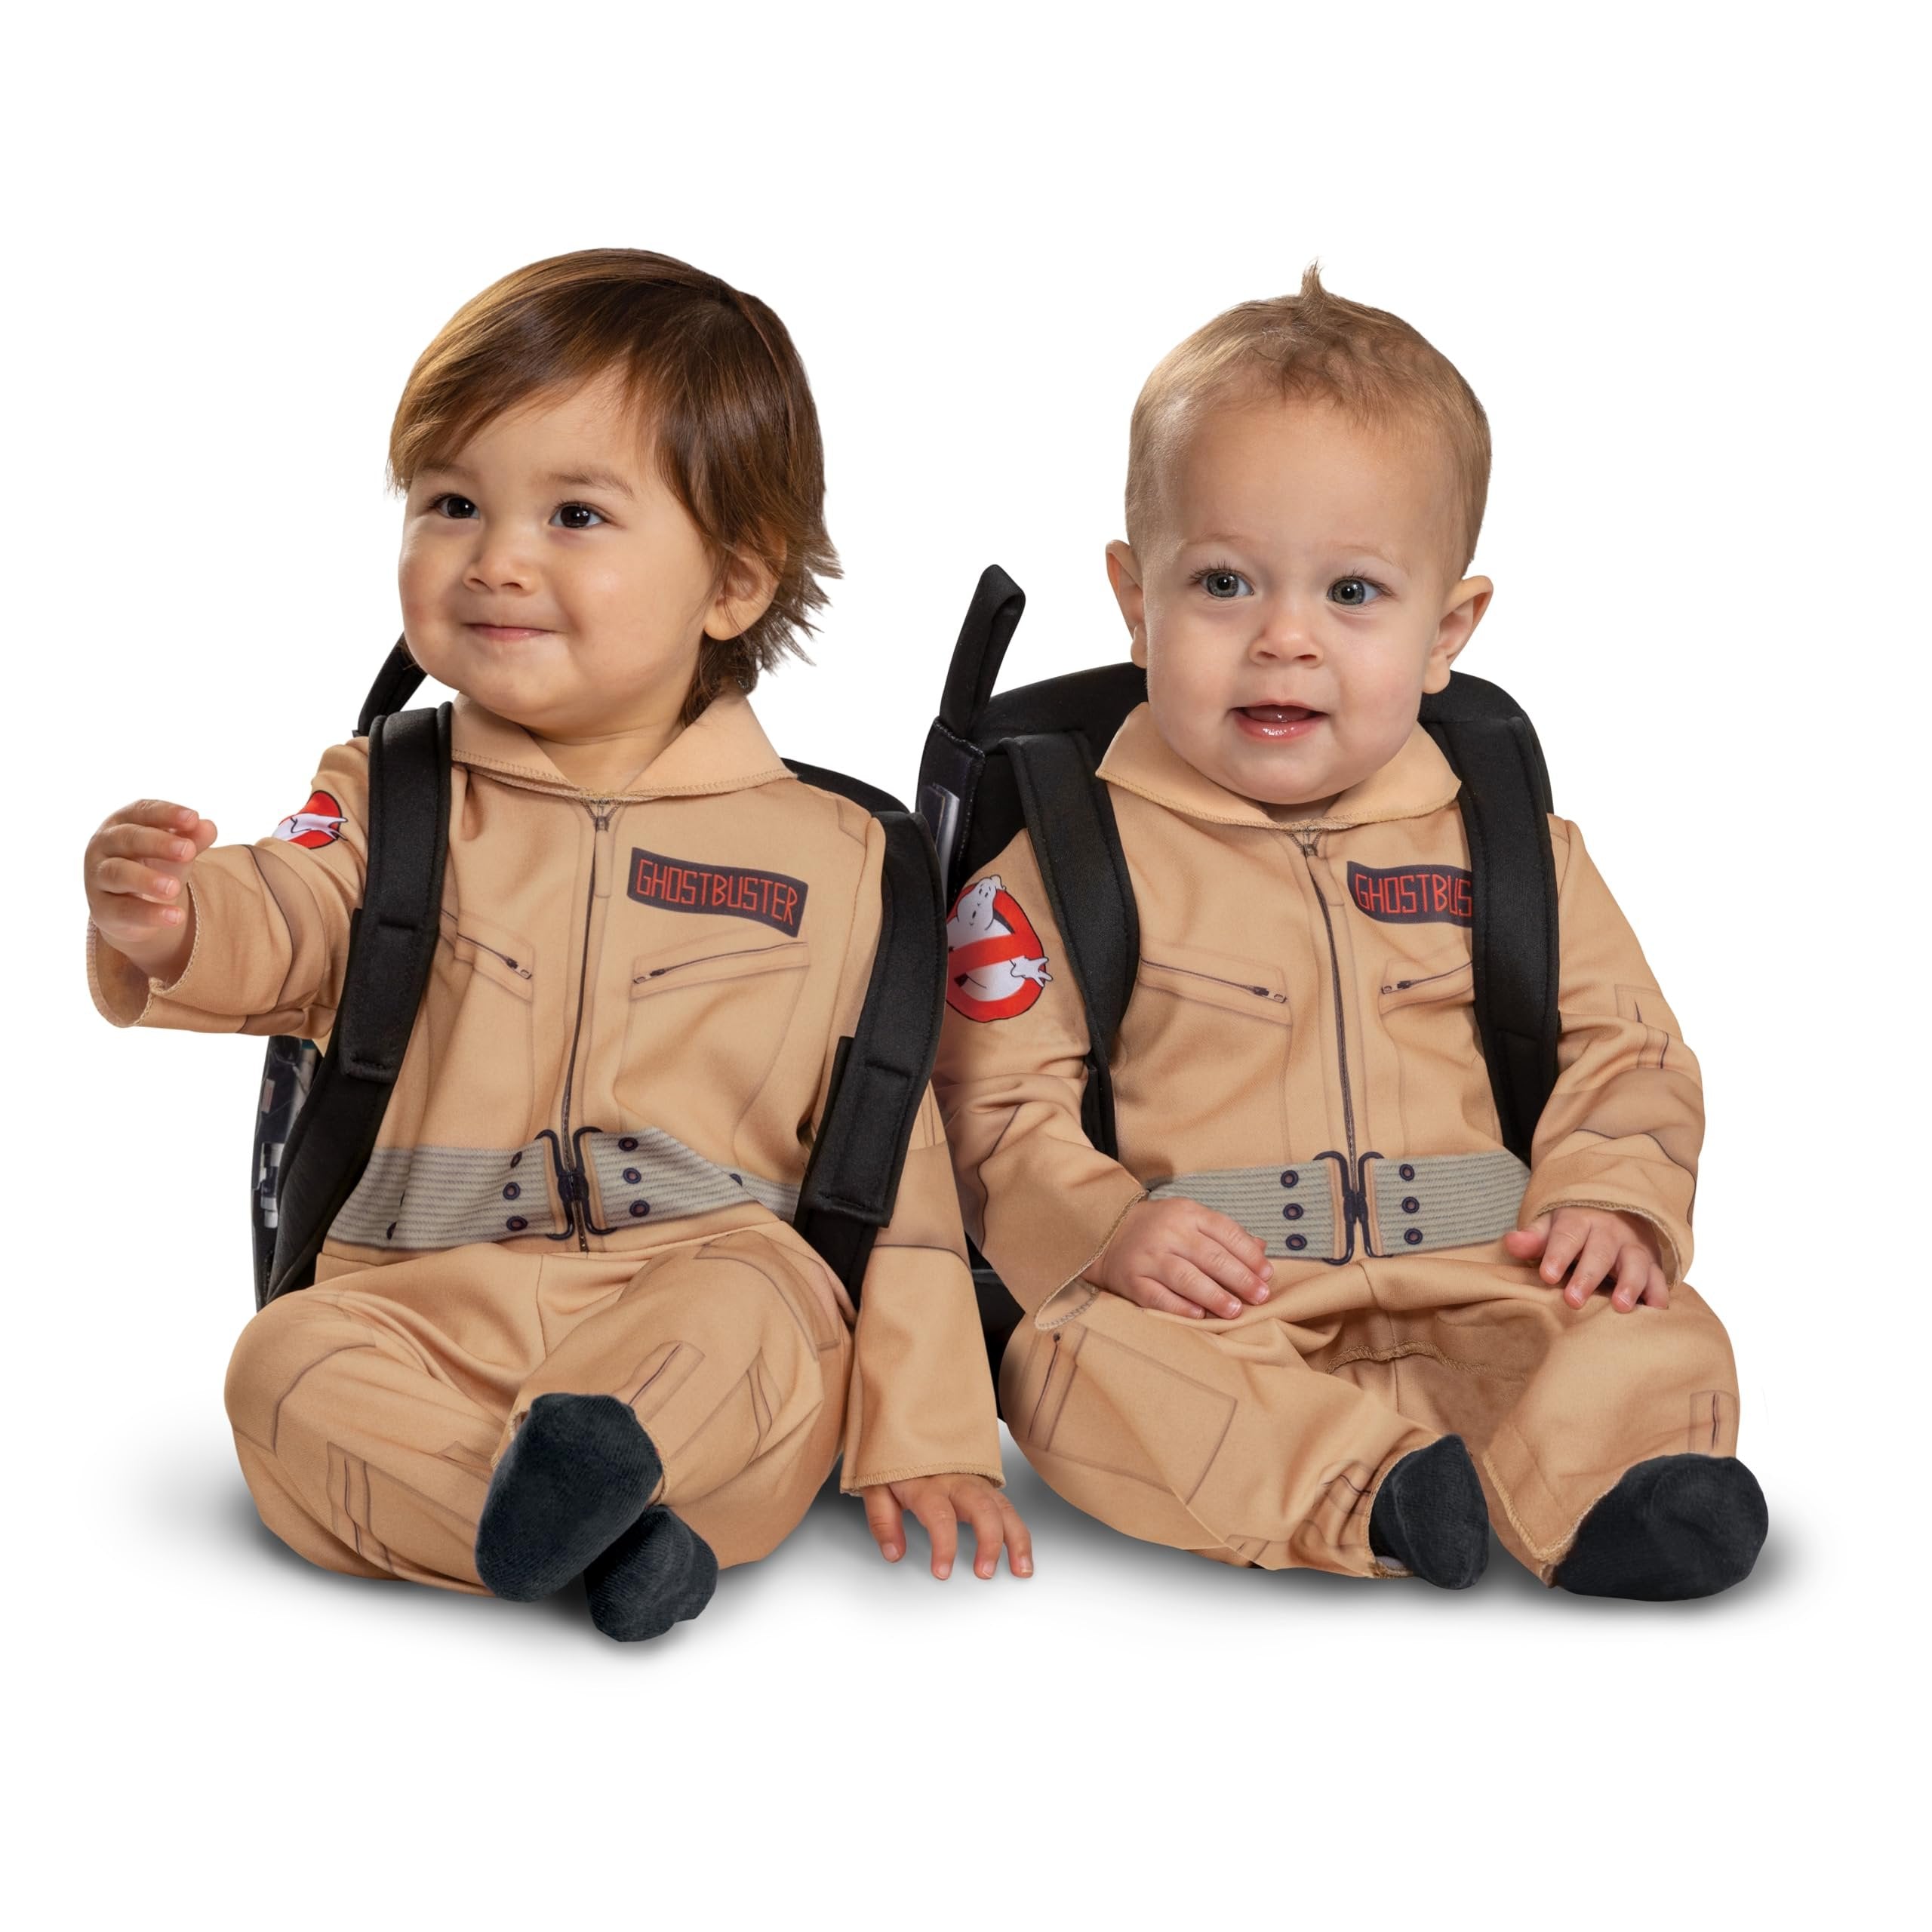 Disguise Ghostbusters Costume for Kids, Official Ghostbusters Classic Jumpsuit with Proton Pack Accessory, Toddler Size Medium (3T-4T)